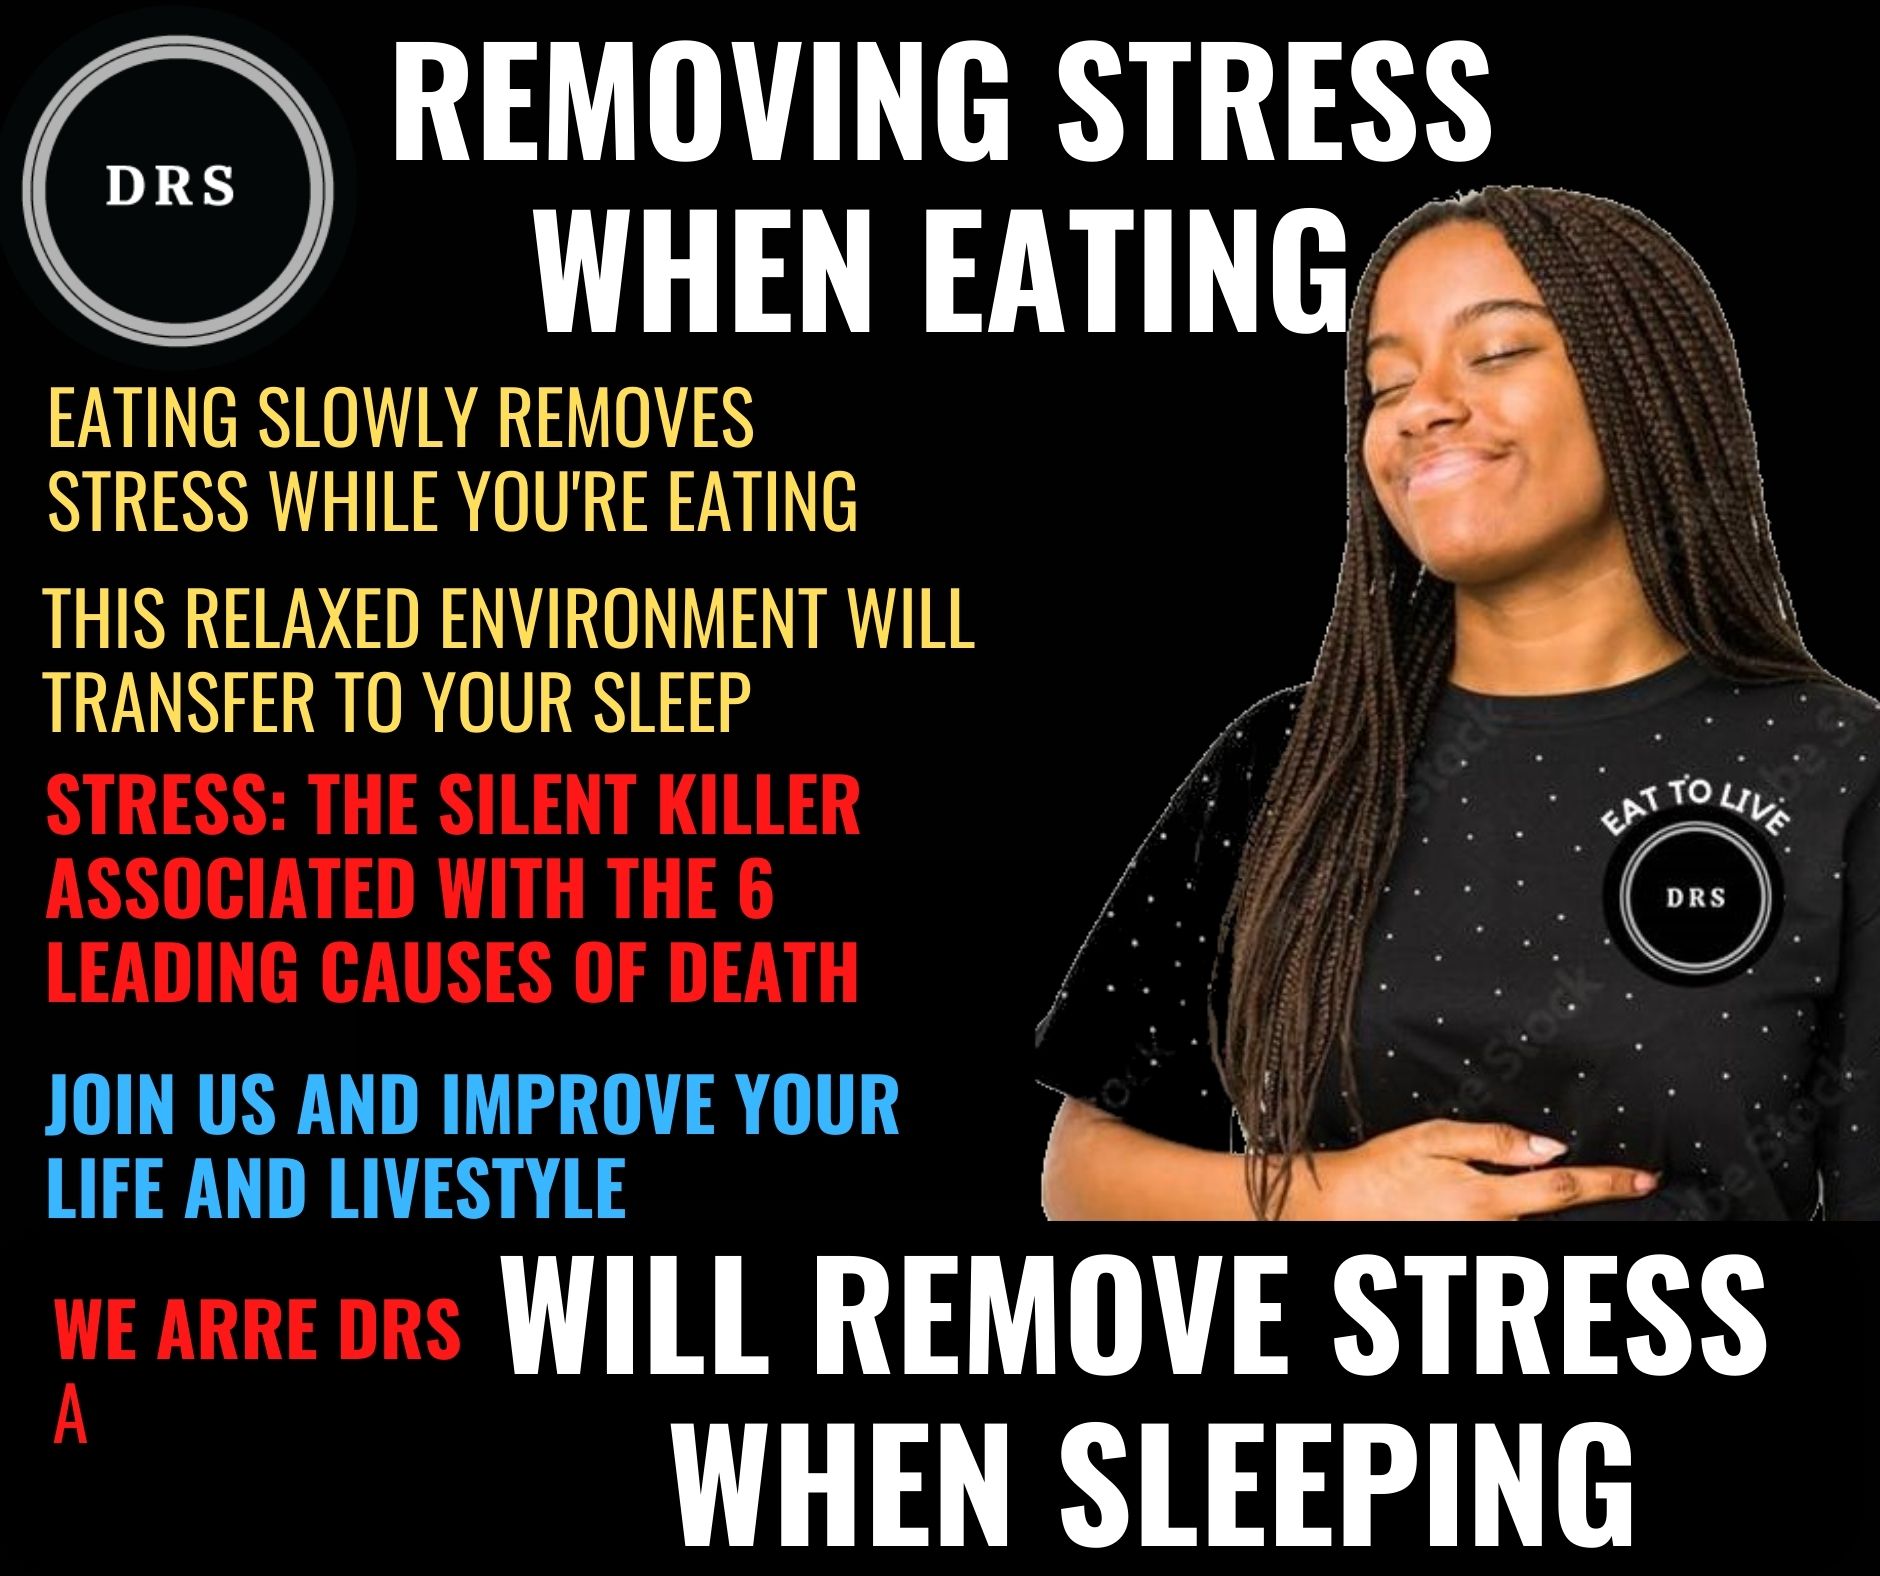 Eat Slowly and Remove Stress